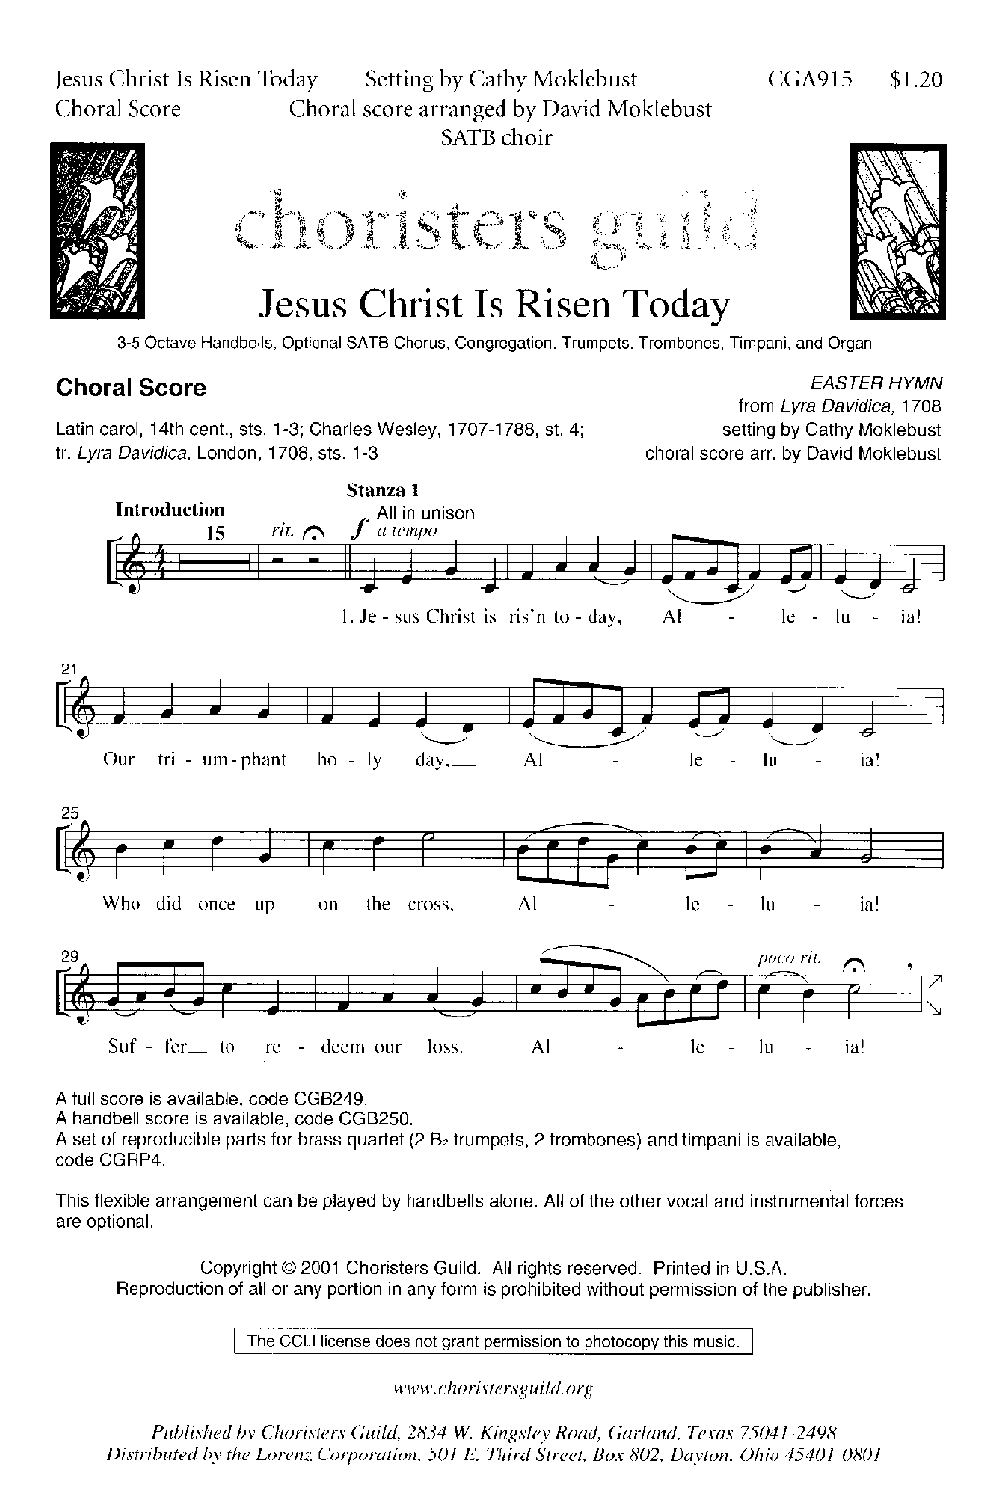 Jesus Christ Is Risen Today (Easter Hymn) Fanfare, Melody